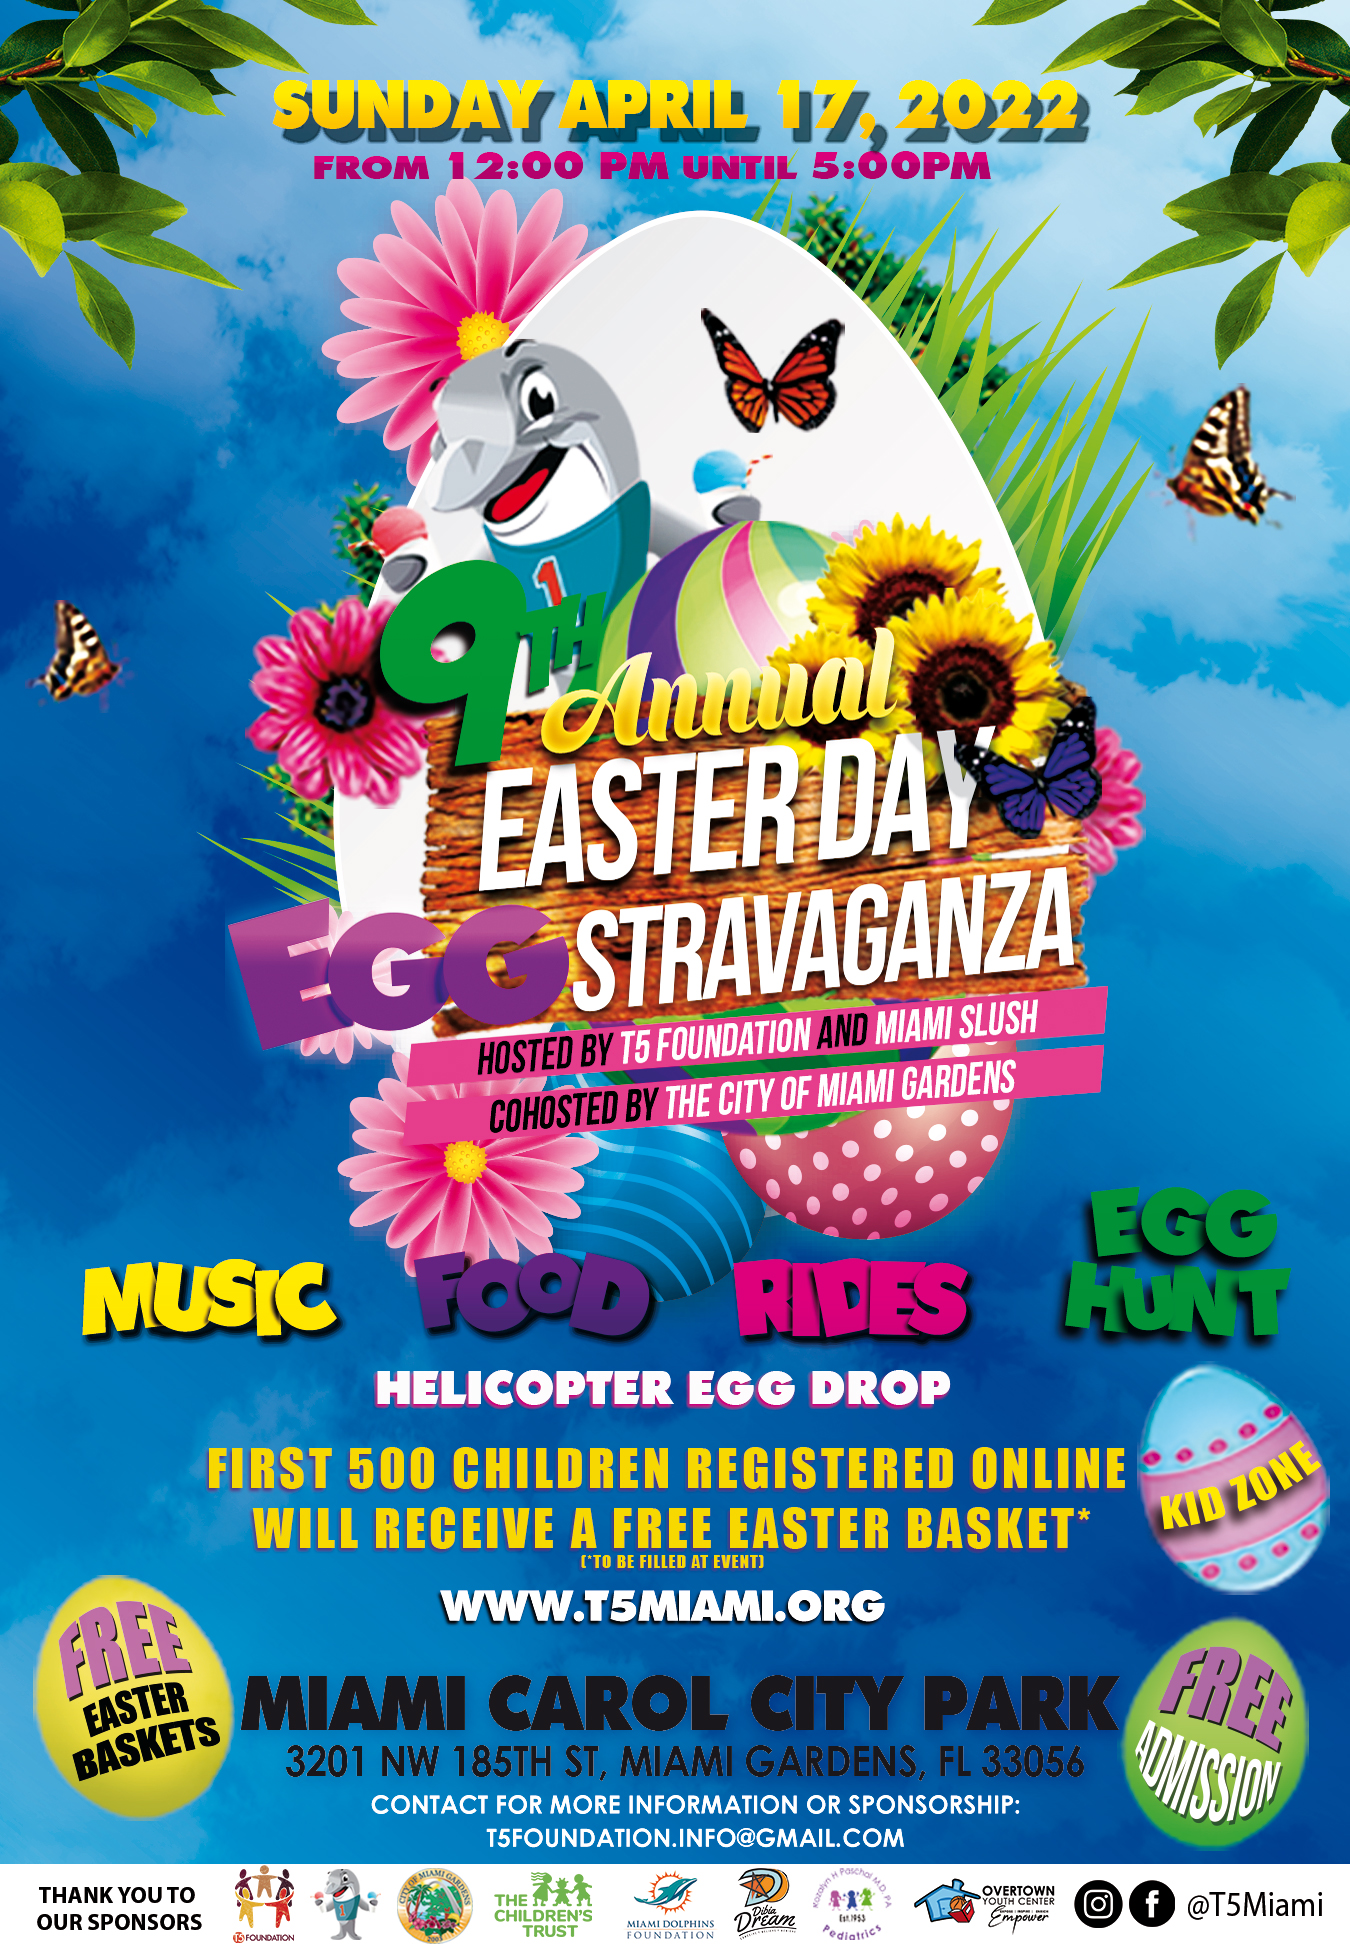 9th Annual Easter Day Eggstravaganza Hosted by T5 Foundation and Cohosted by the City of Miami Gardens